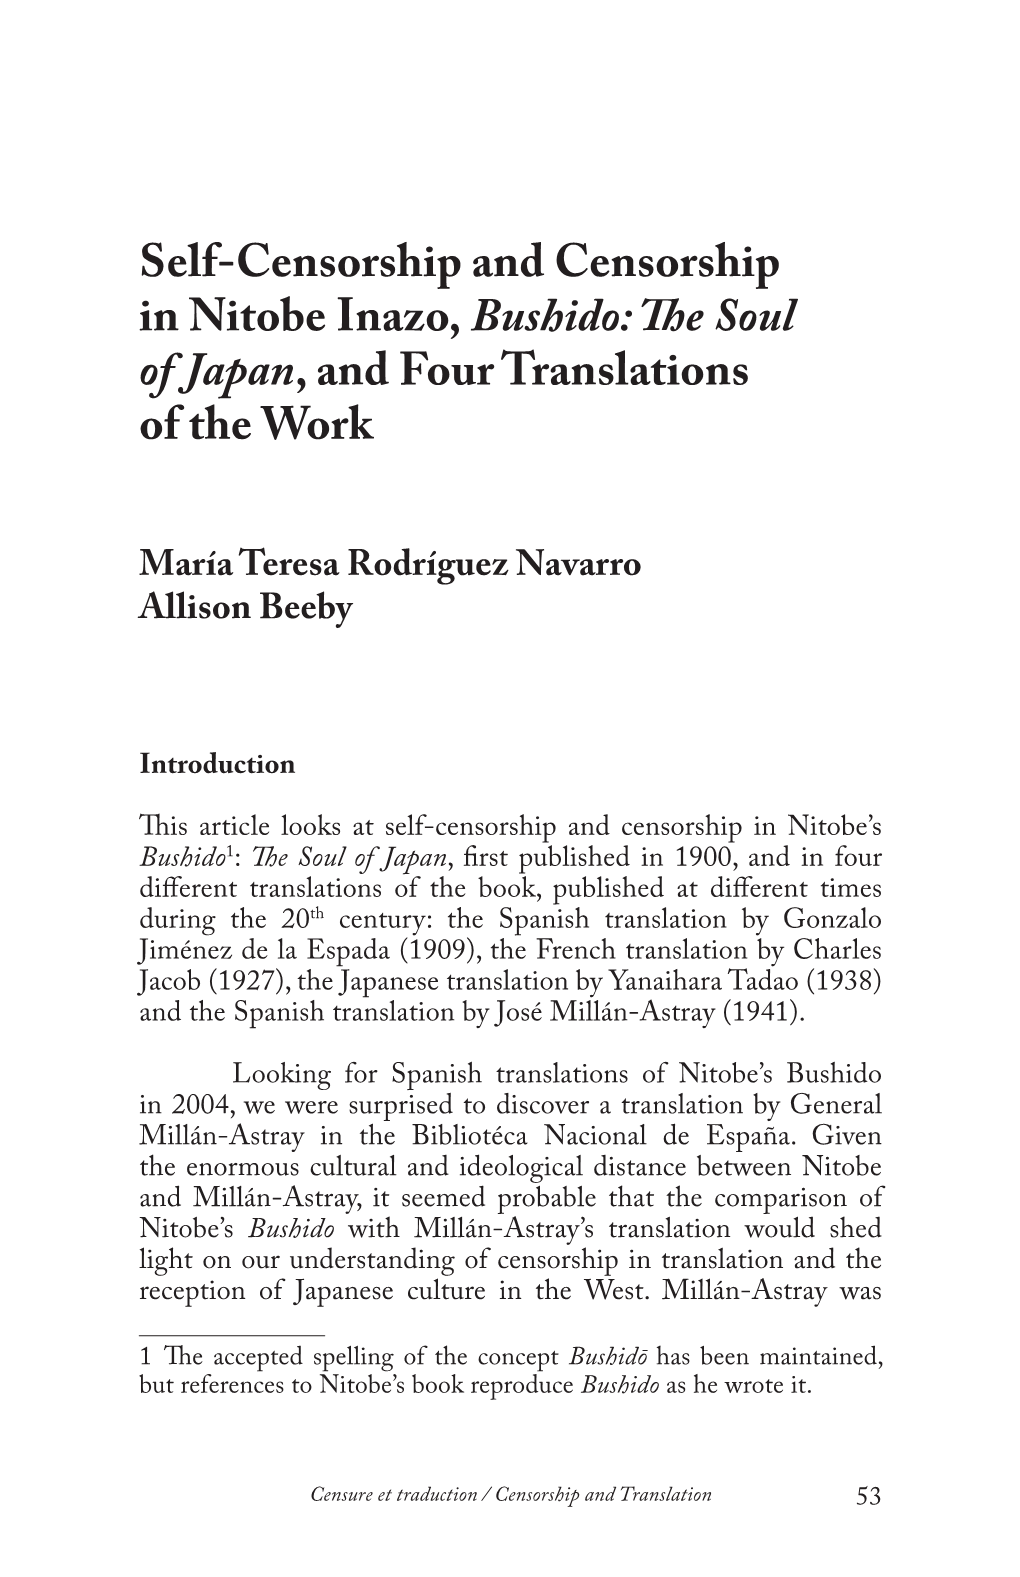 Self-Censorship and Censorship in Nitobe Inazo, Bushido: the Soul of Japan, and Four Translations of the Work